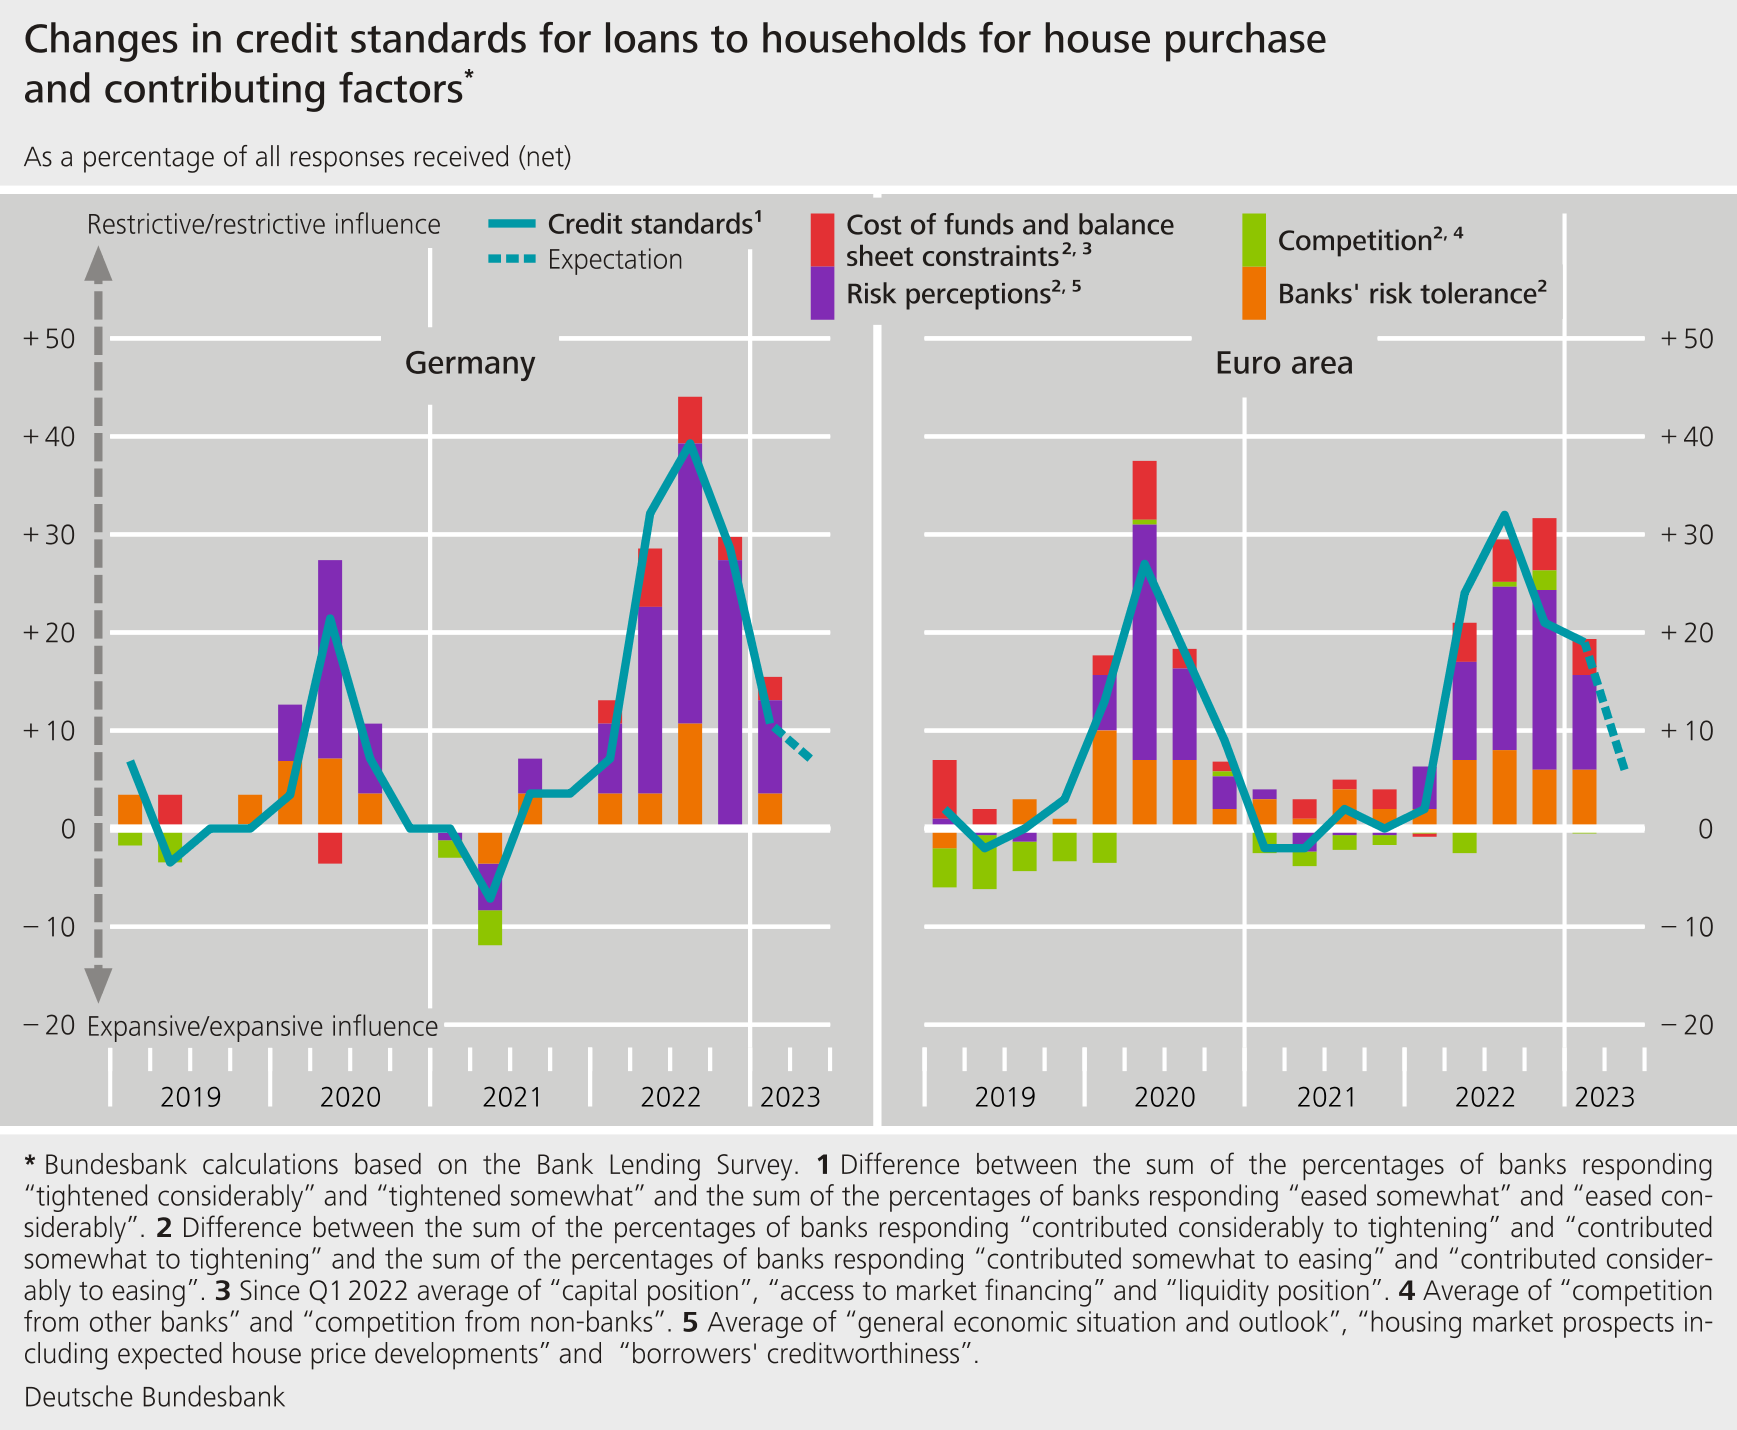 Change in credit standards for loans to households for house purchase and contributing factors